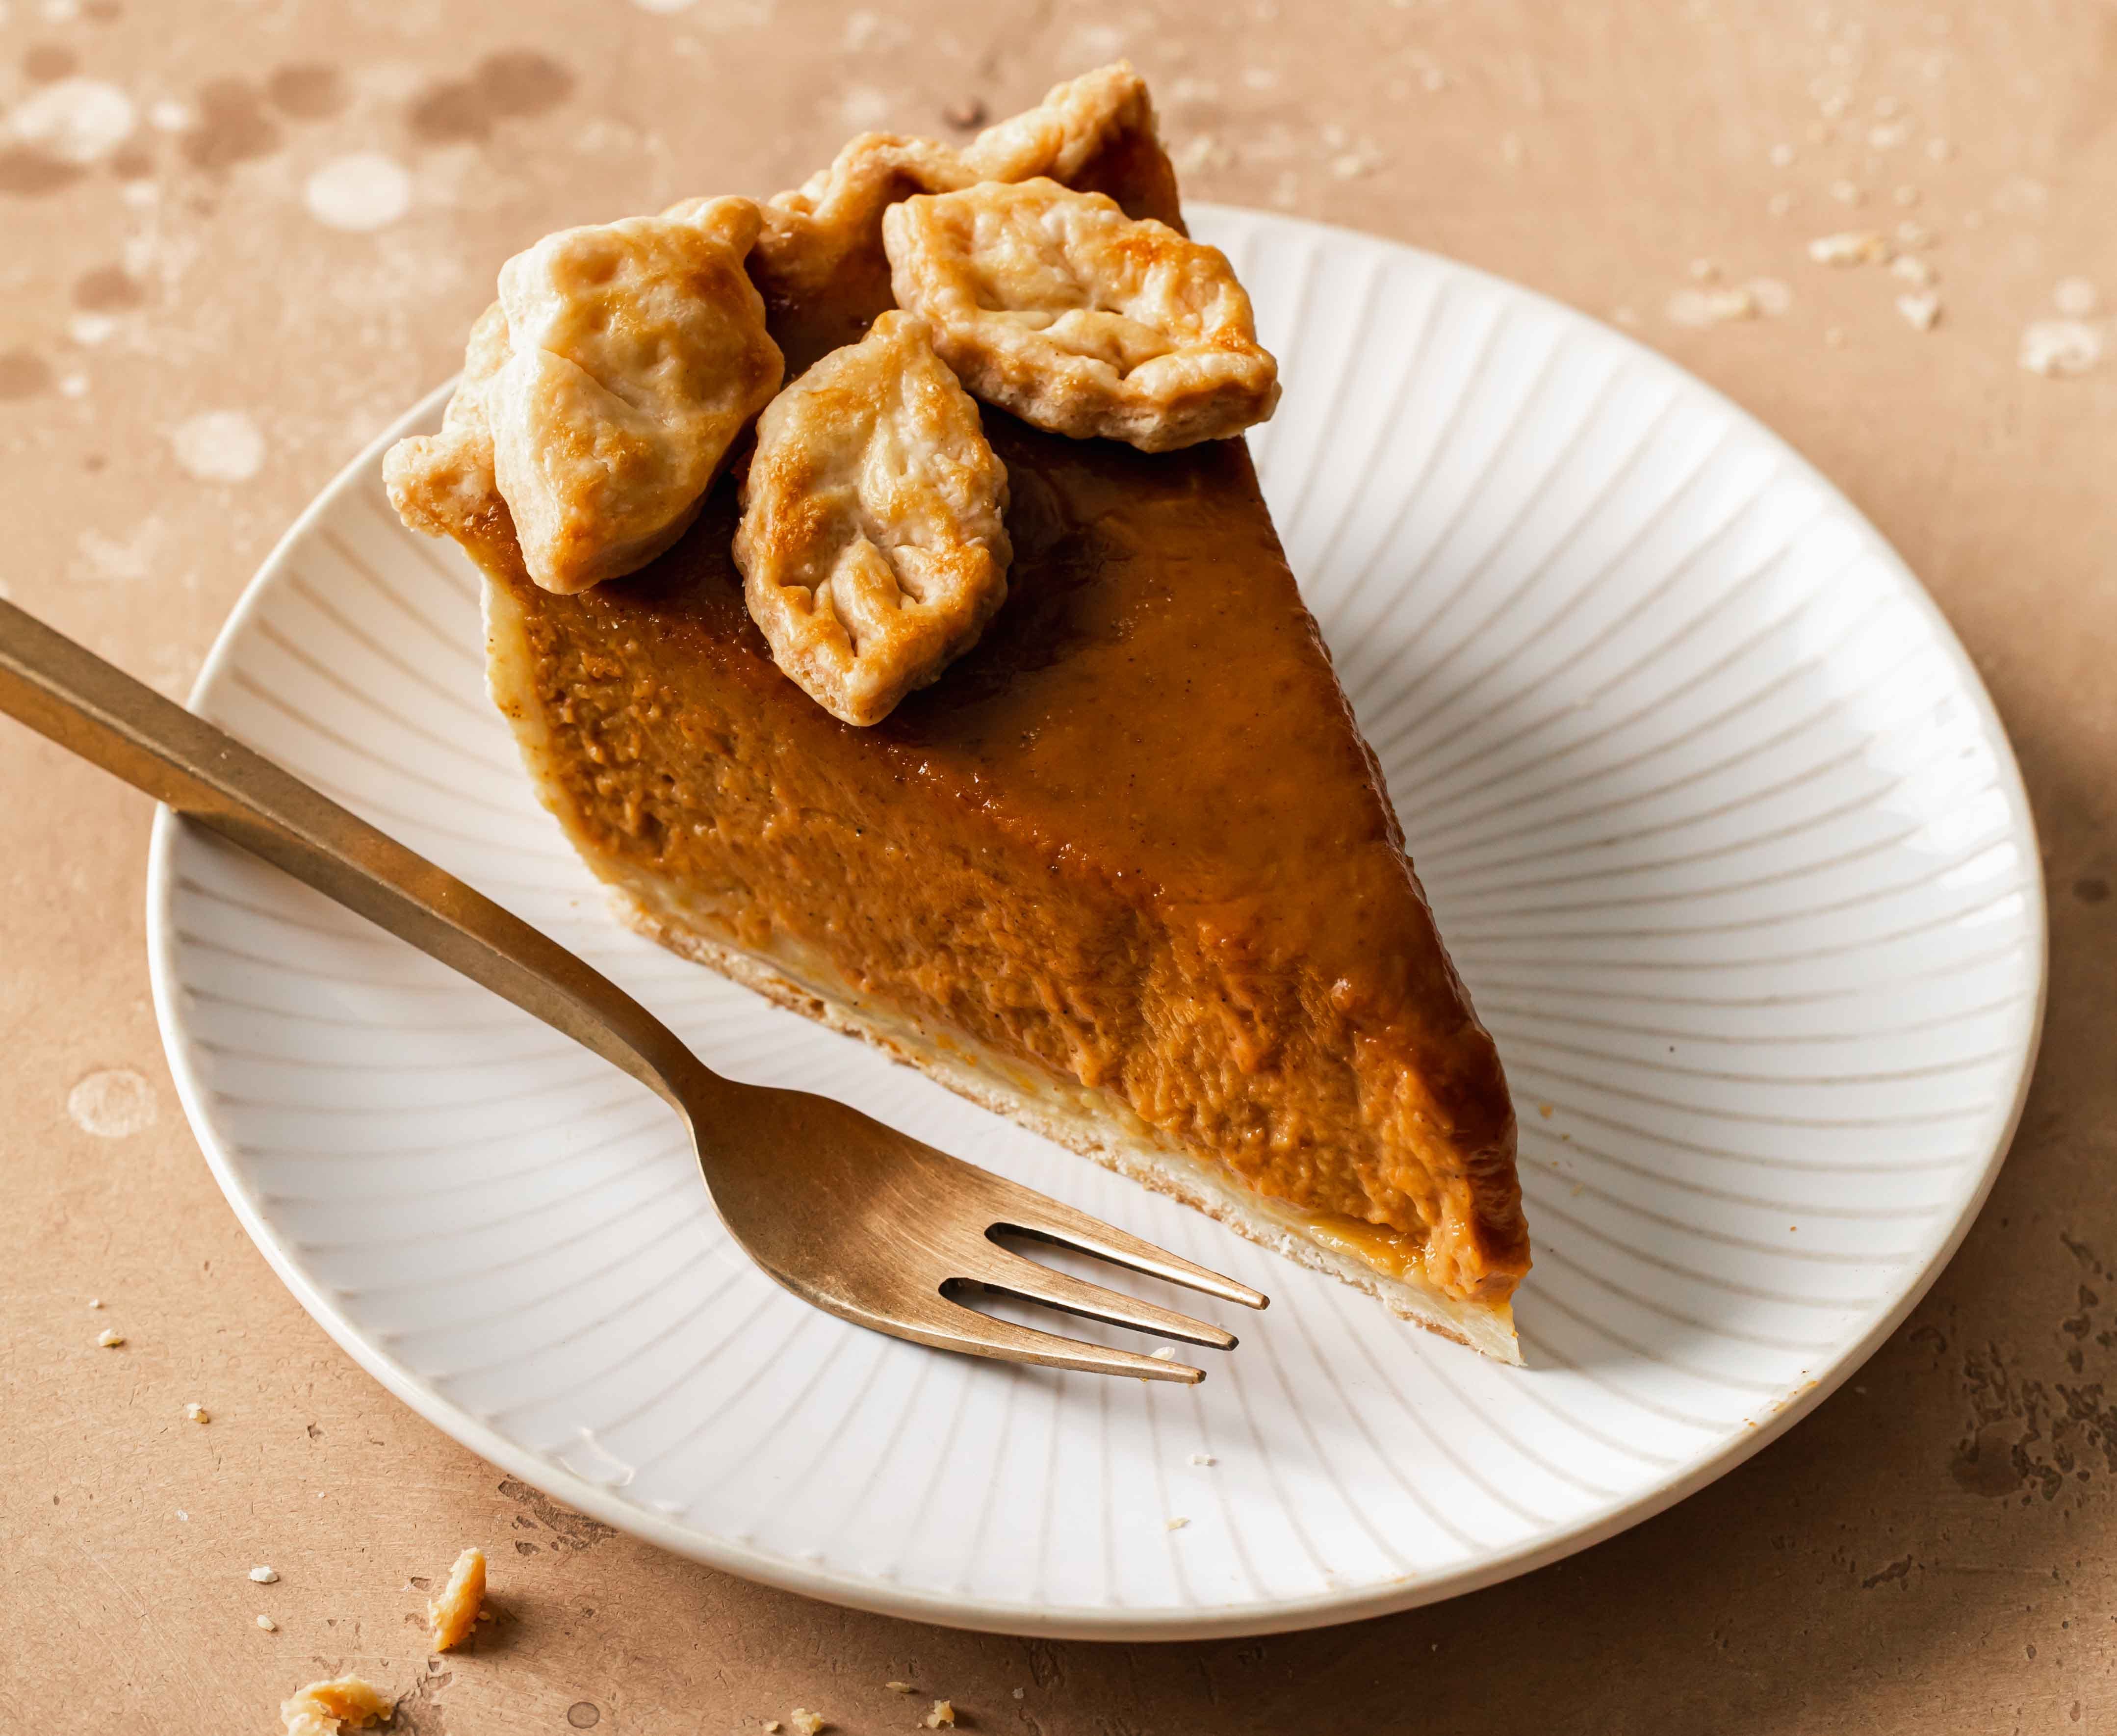 The Ultimate Pie Guide - by Tessa Huff - Bake Club